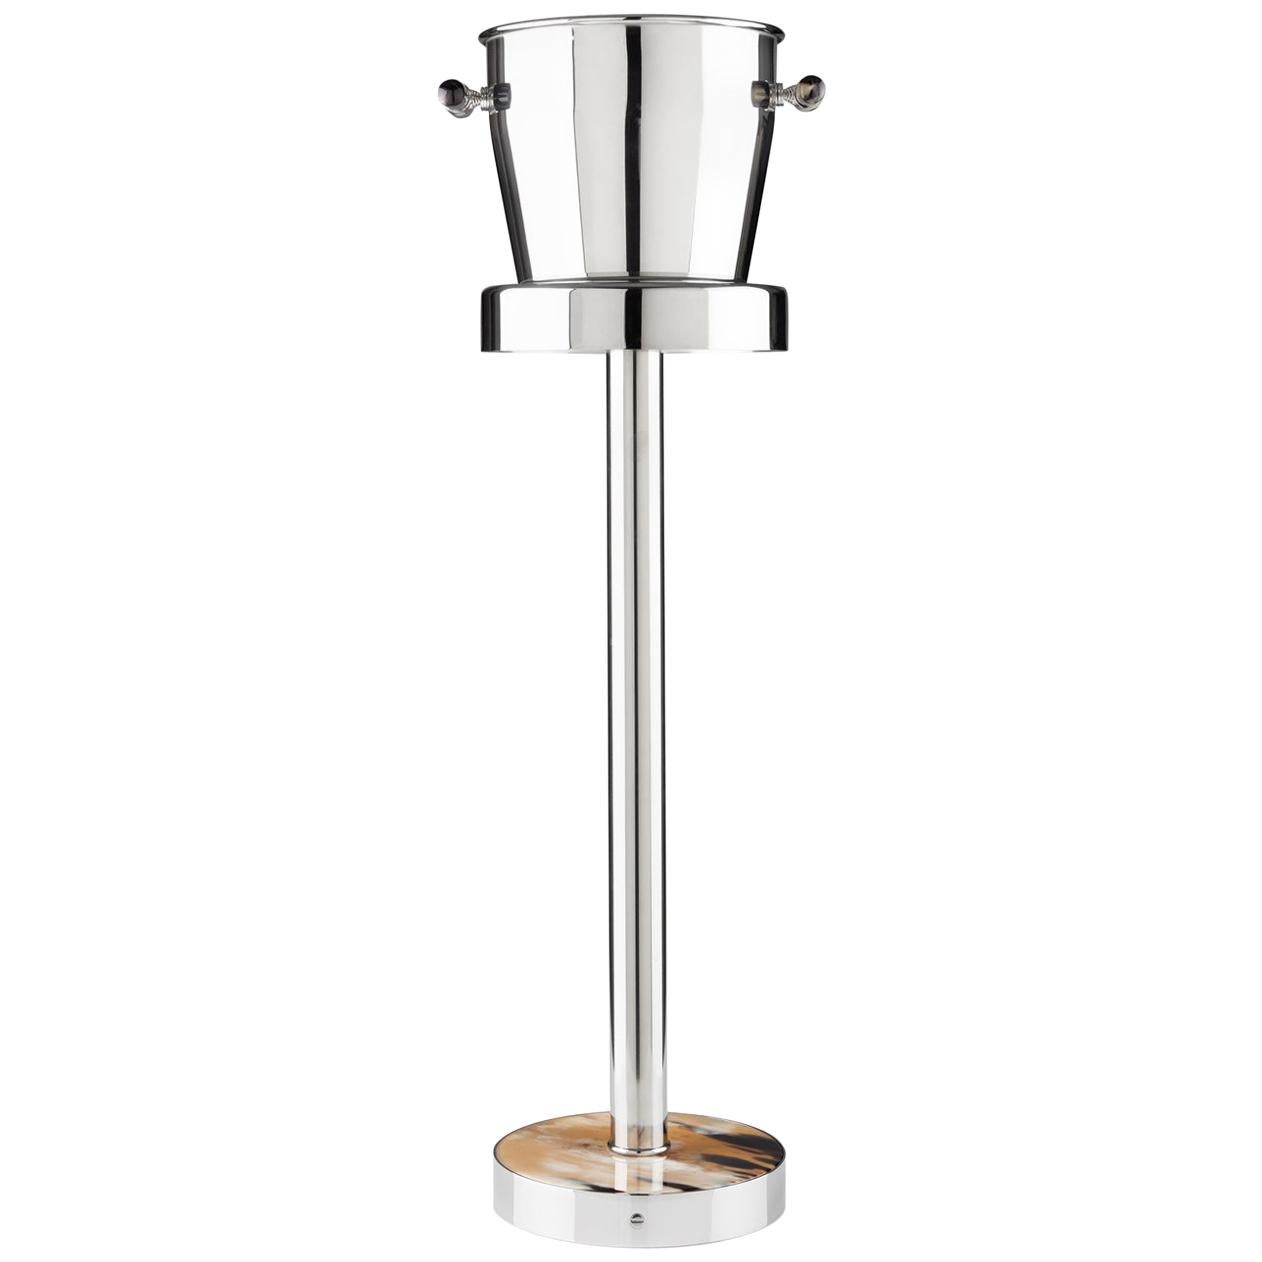 Wine Cooler with Stand in Stainless Steel and Corno Italiano, Mod. 530-531 For Sale